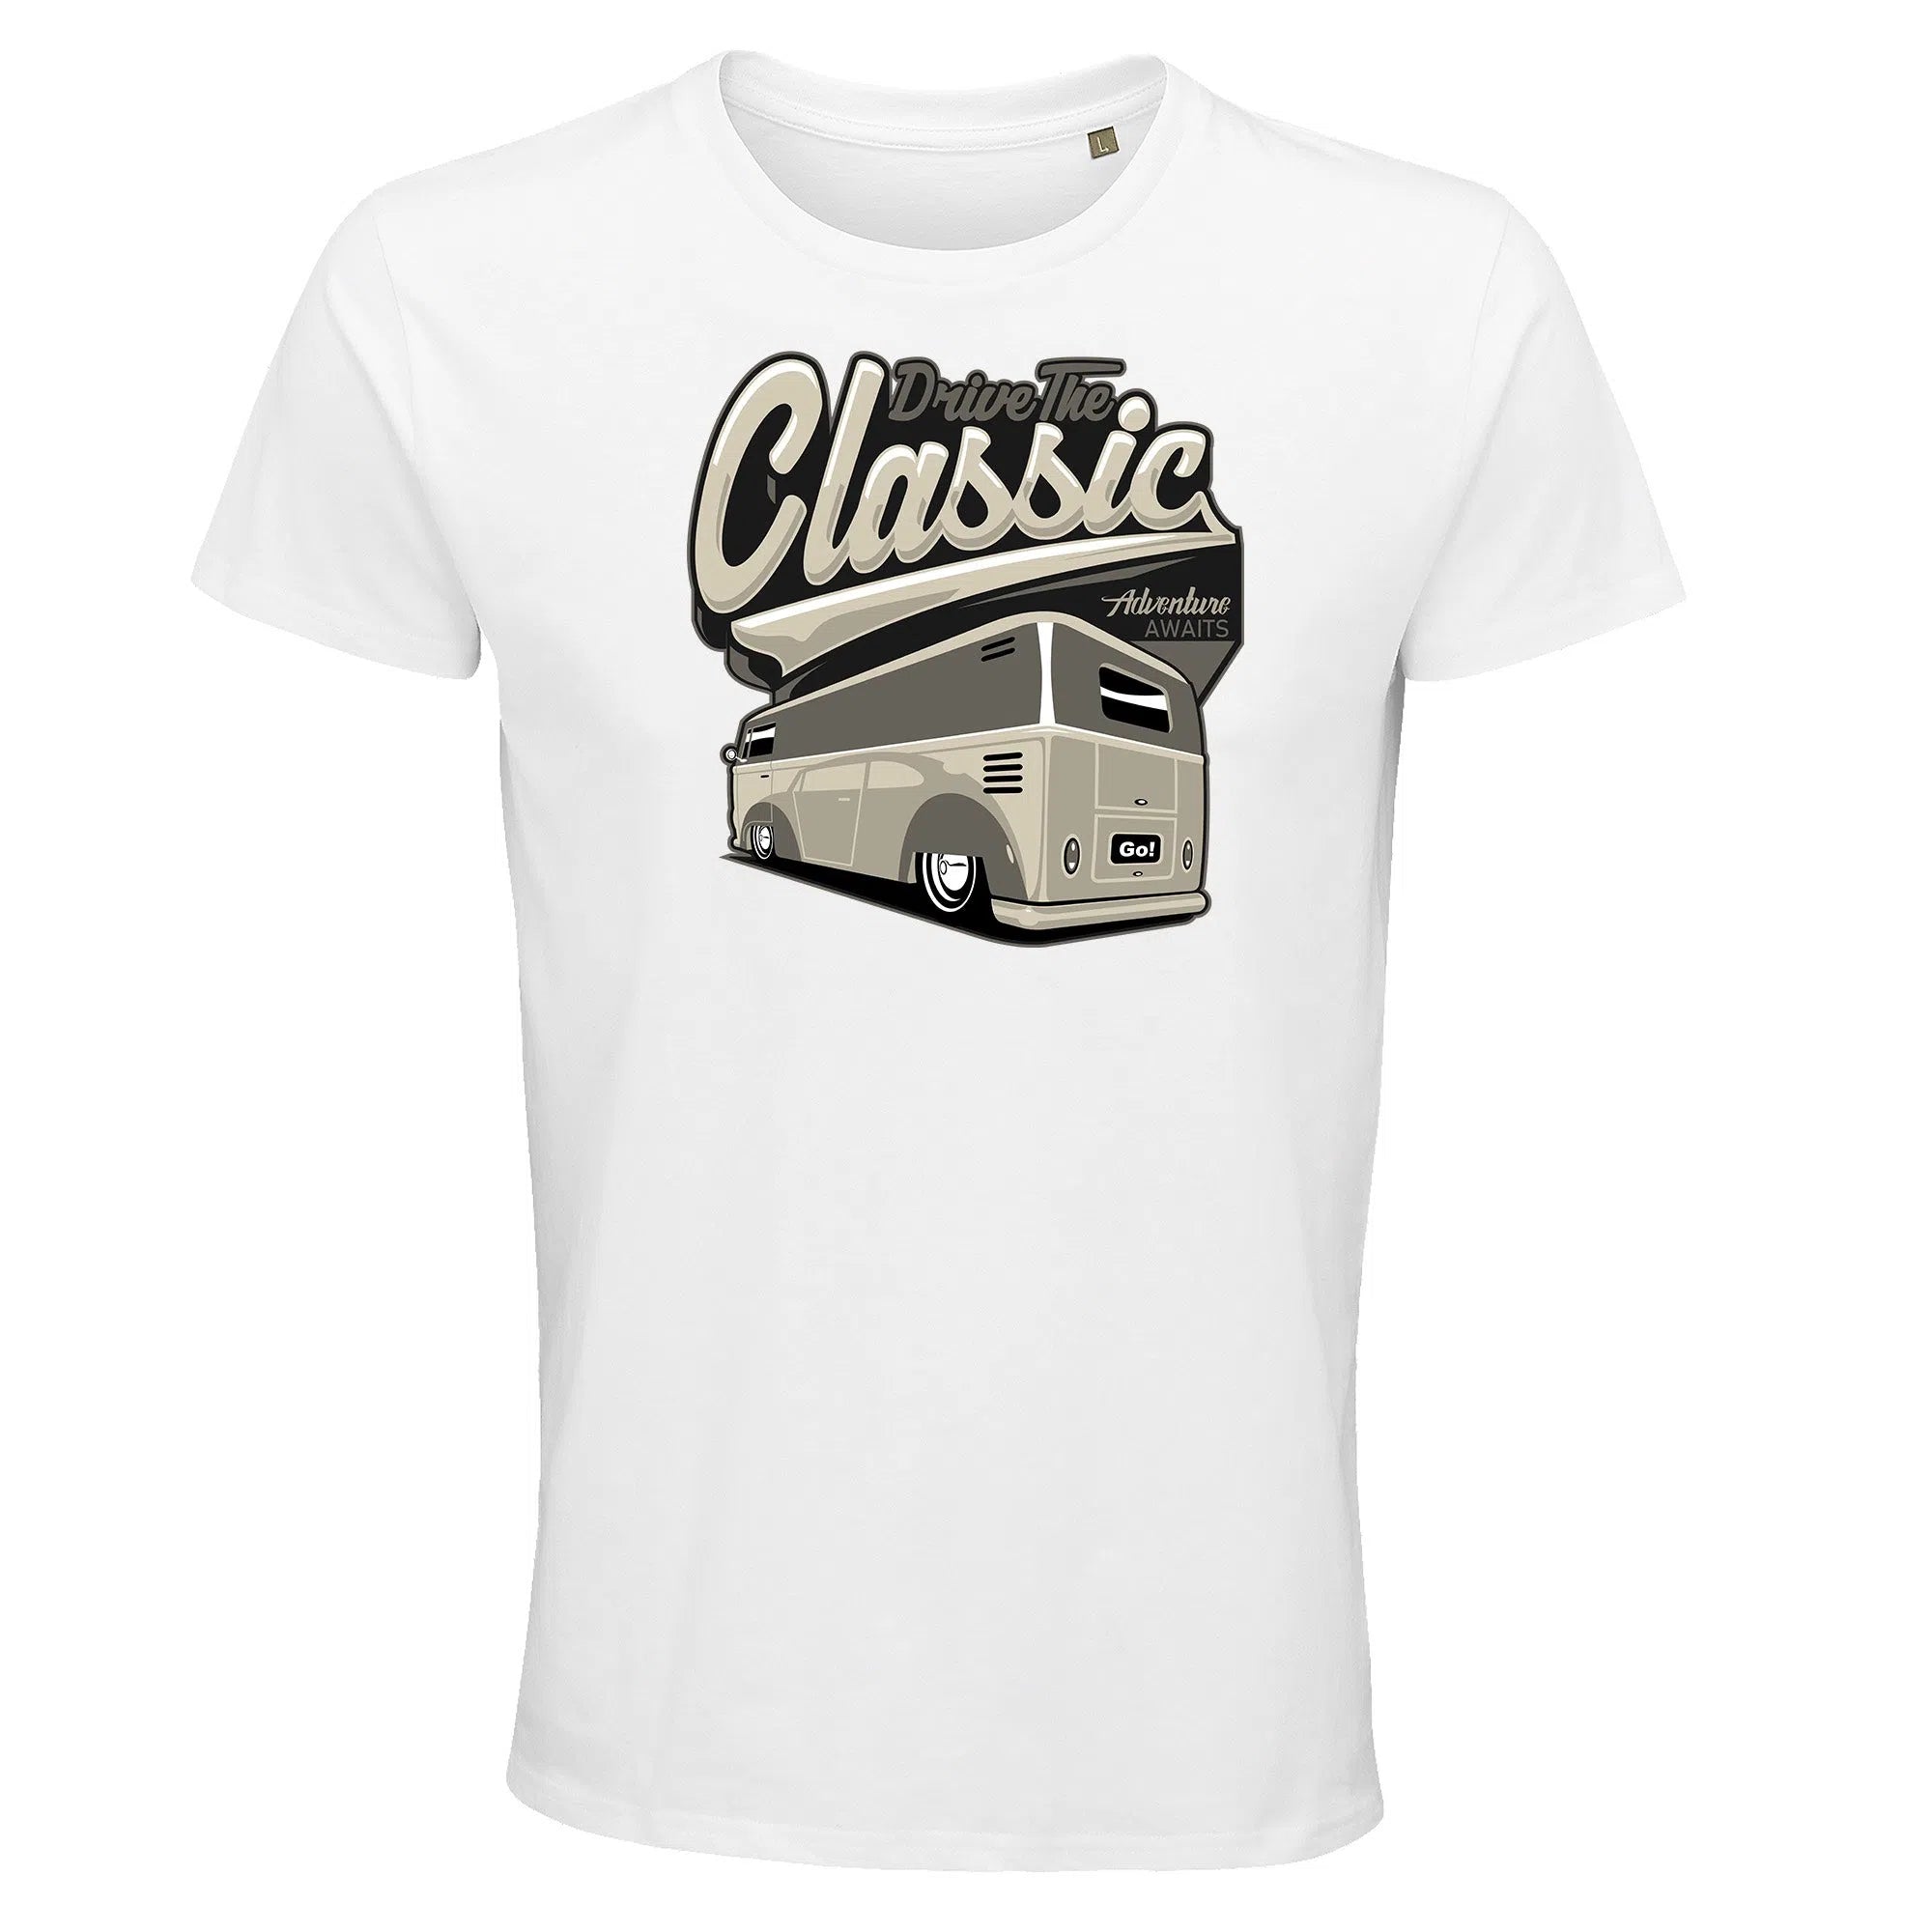 Drive the classic-Imagesdartistes